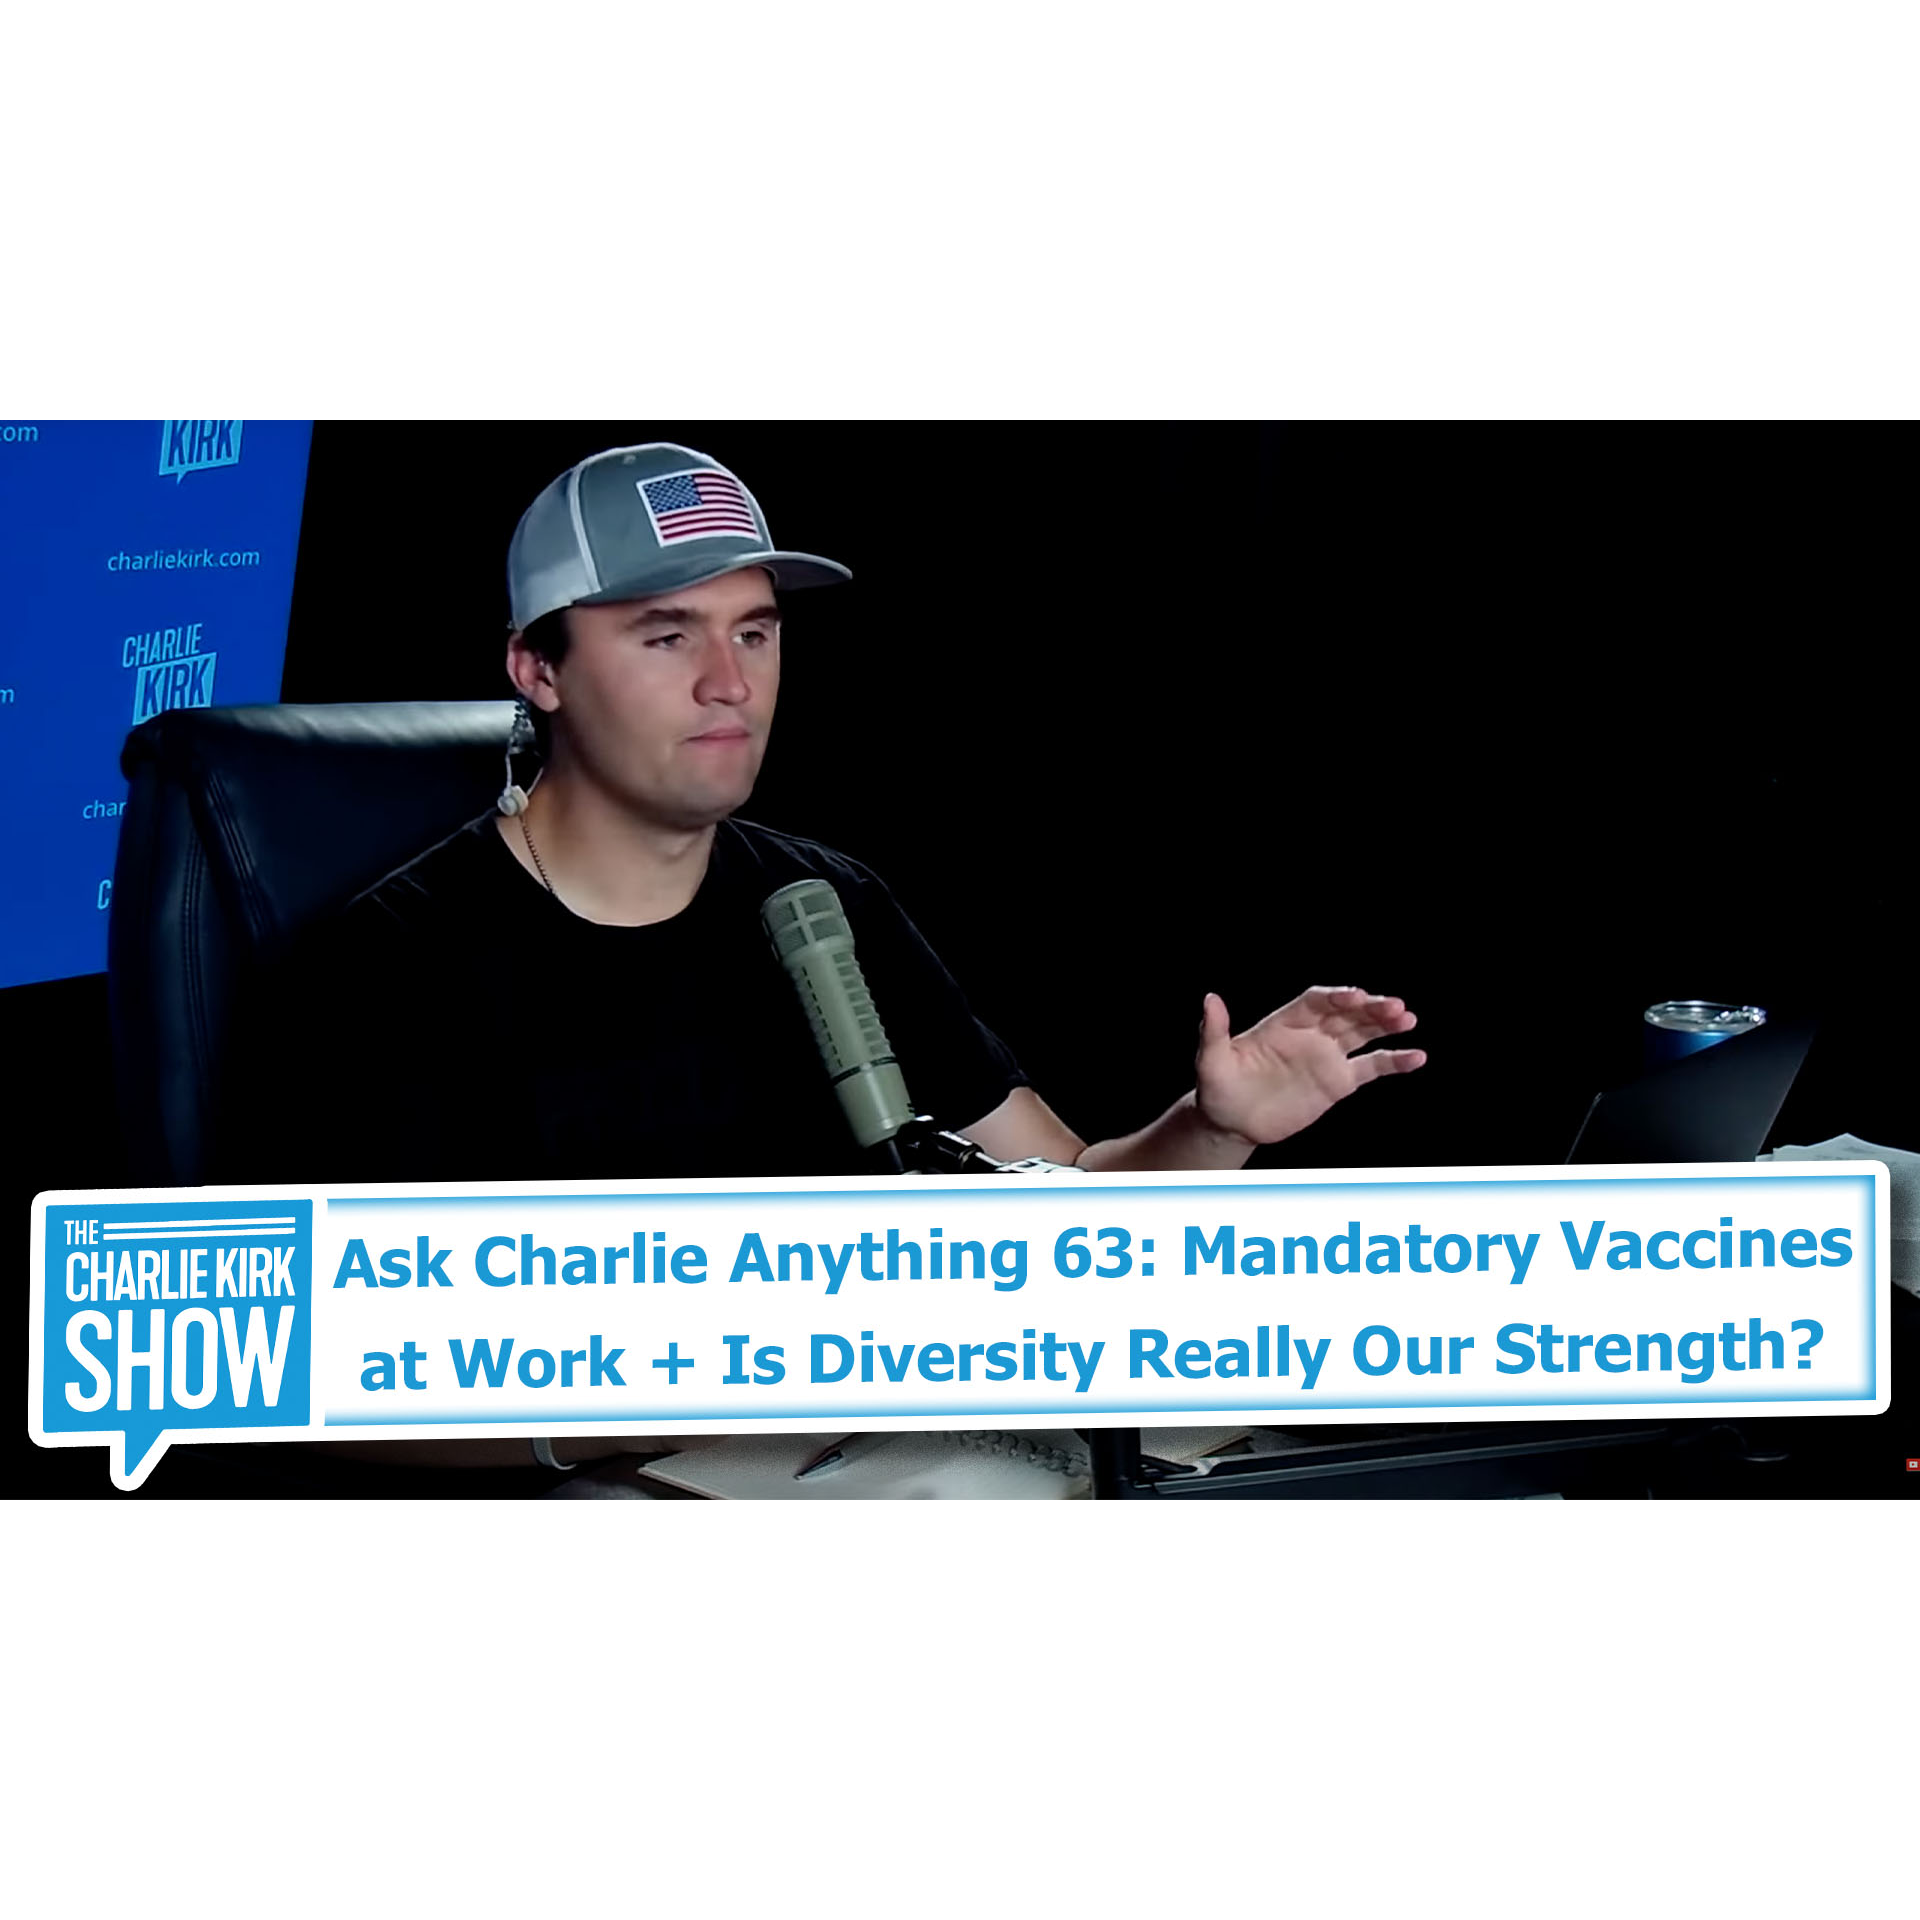 Ask Charlie Anything 63: Mandatory Vaccines at Work + Is Diversity Really Our Strength?